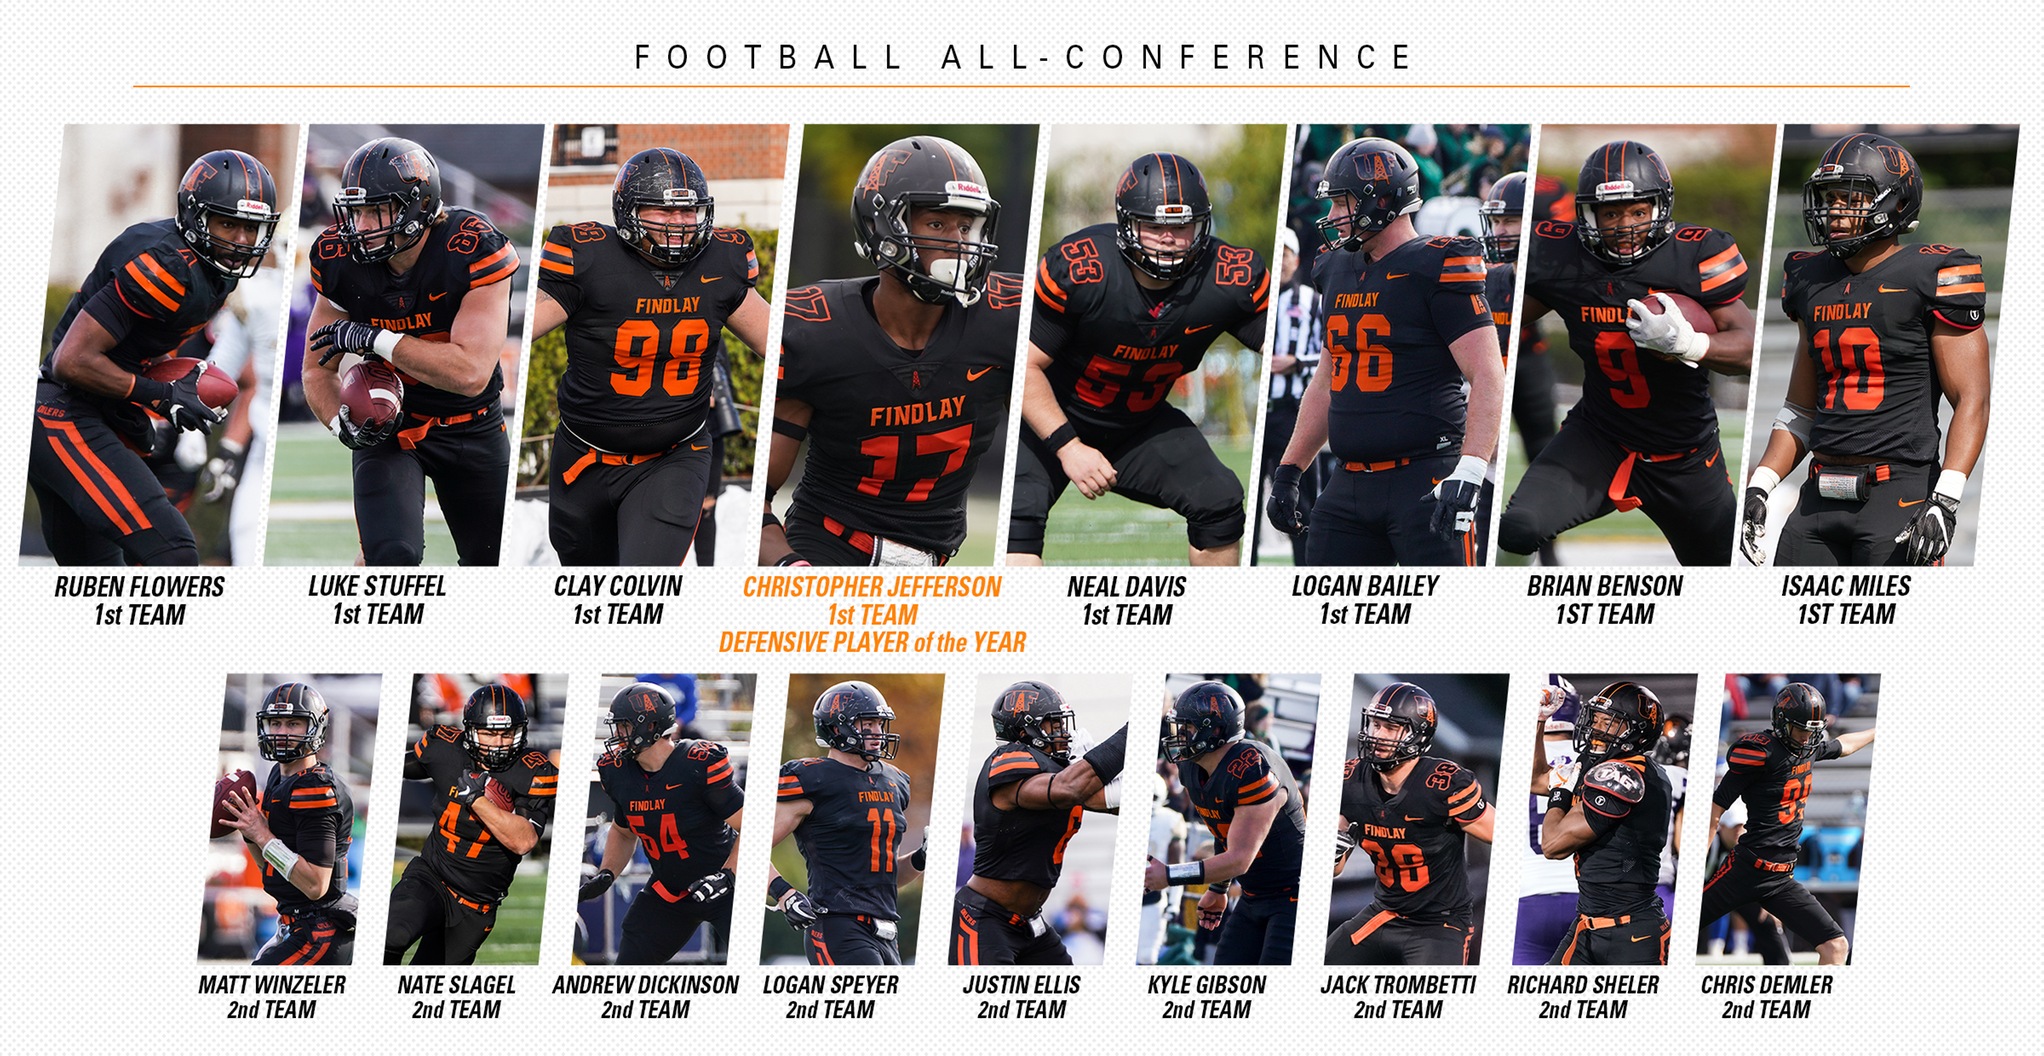 Oilers Lead G-MAC with 23 All-Conference Selections | Jefferson Earns Defensive Player of the Year